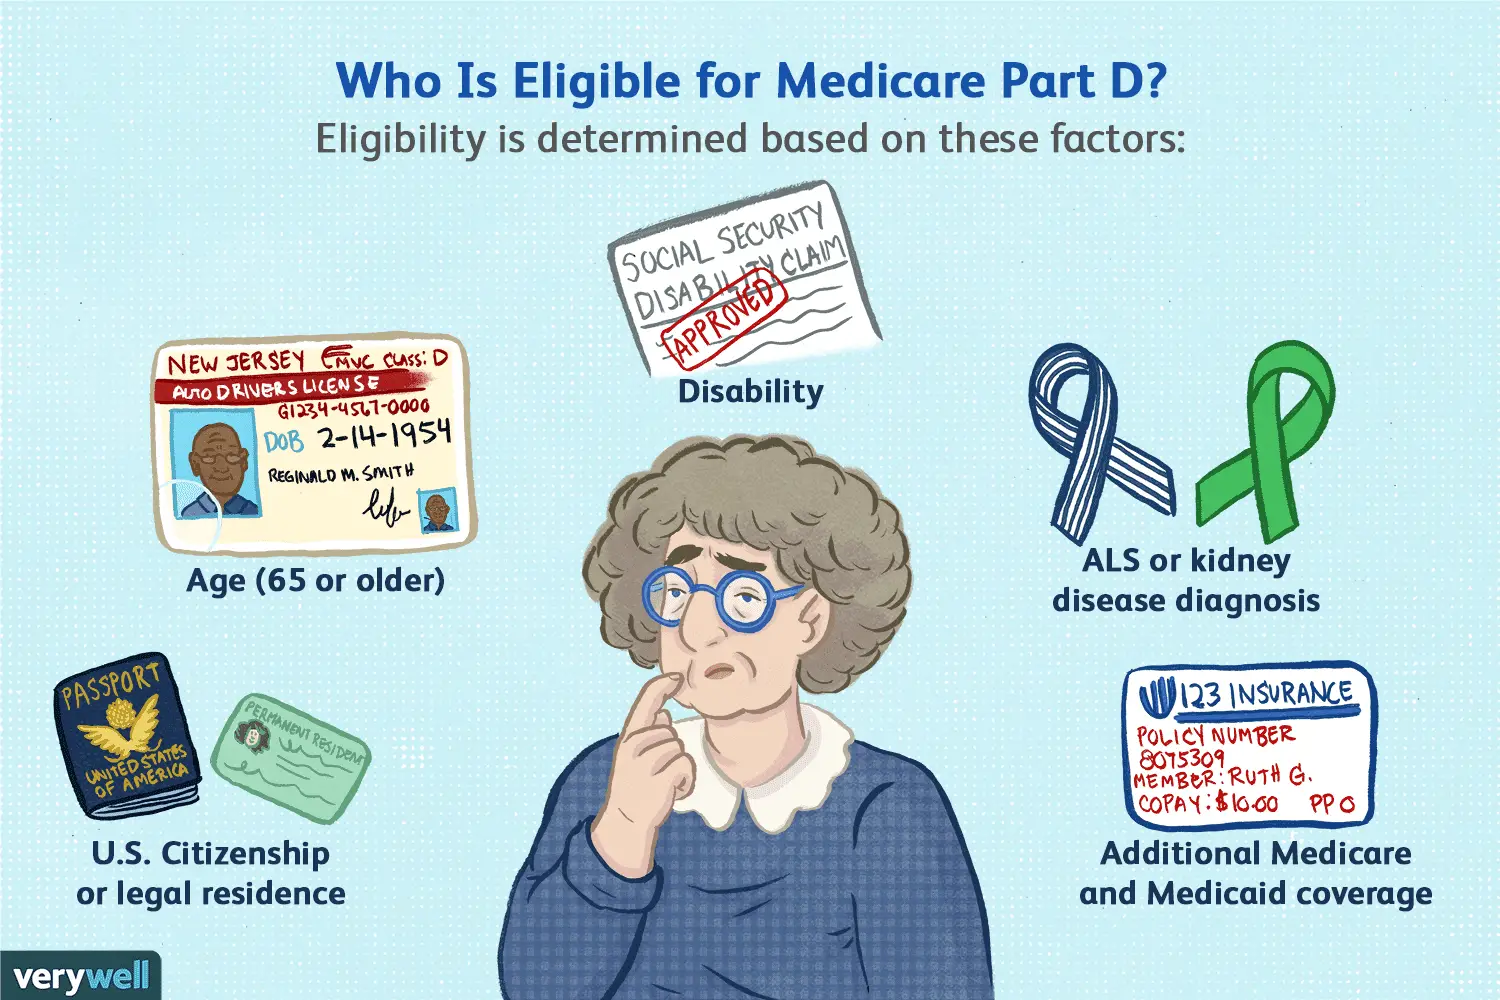 An Overview of Medicare Eligibility and Benefits